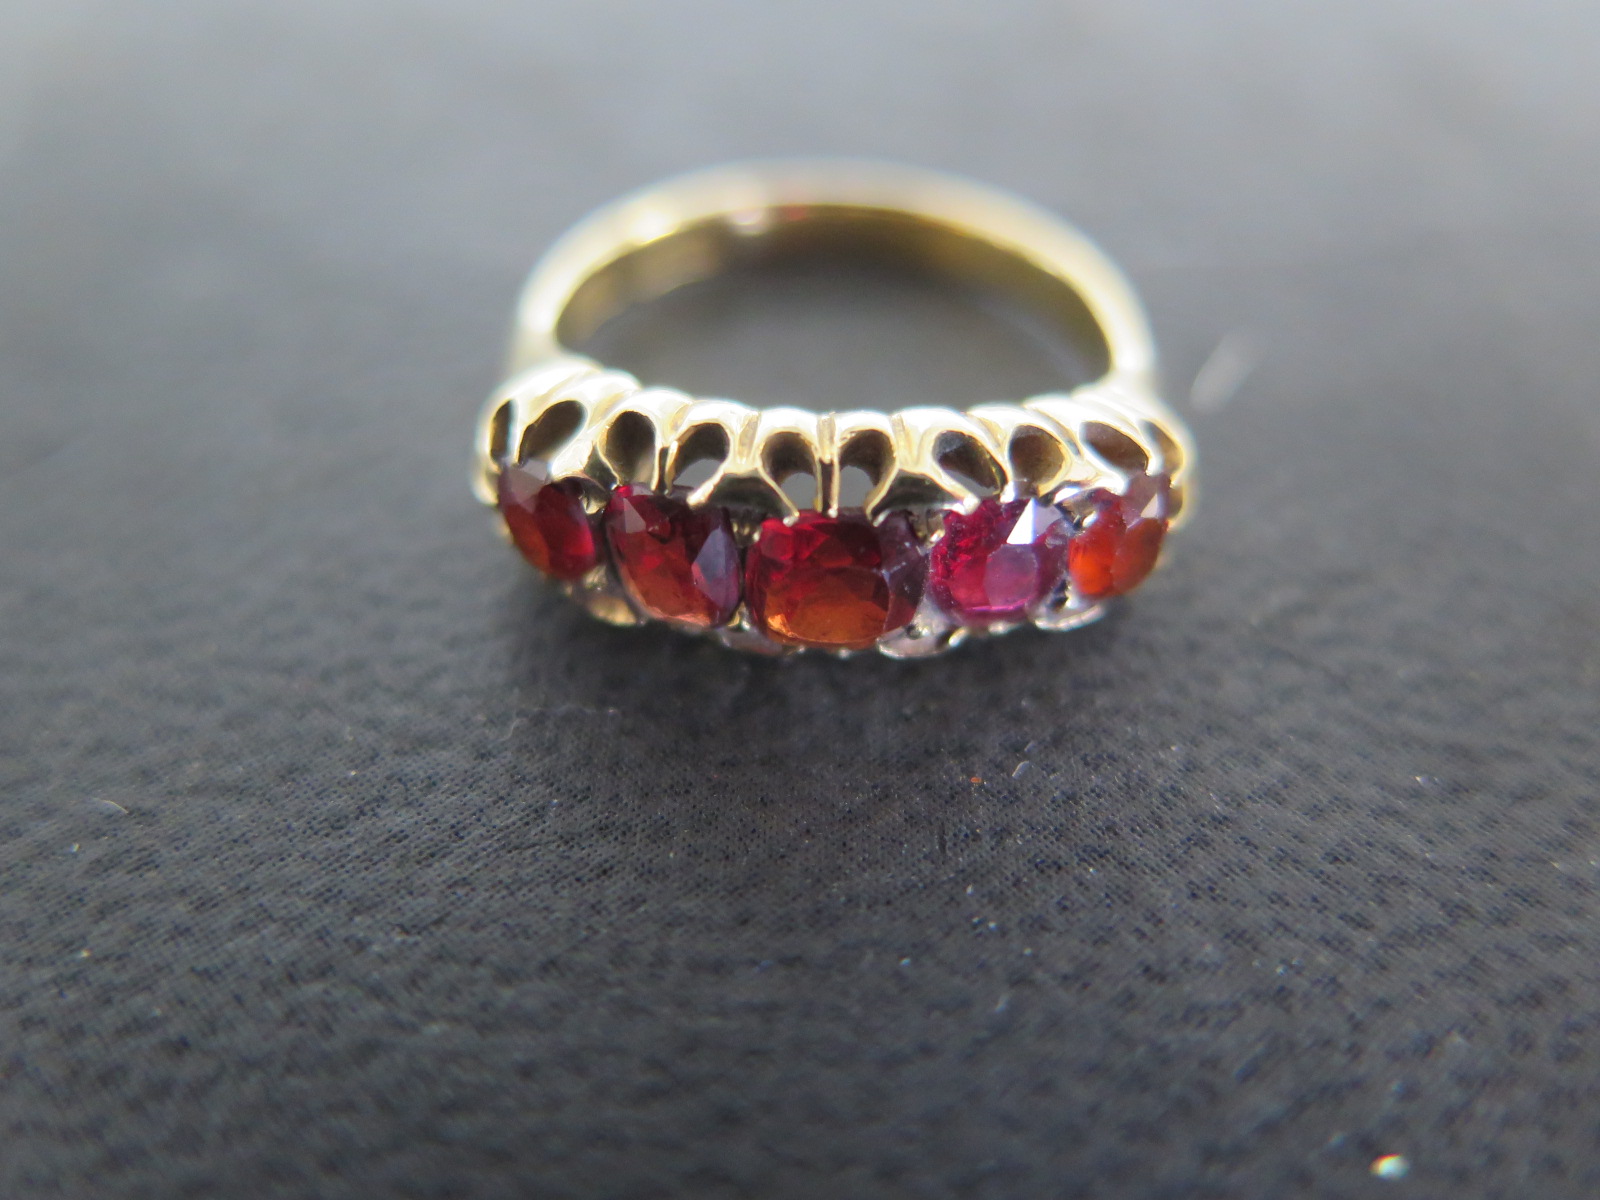 An 18ct yellow gold garnet five stone ring size M - approx weight 4.